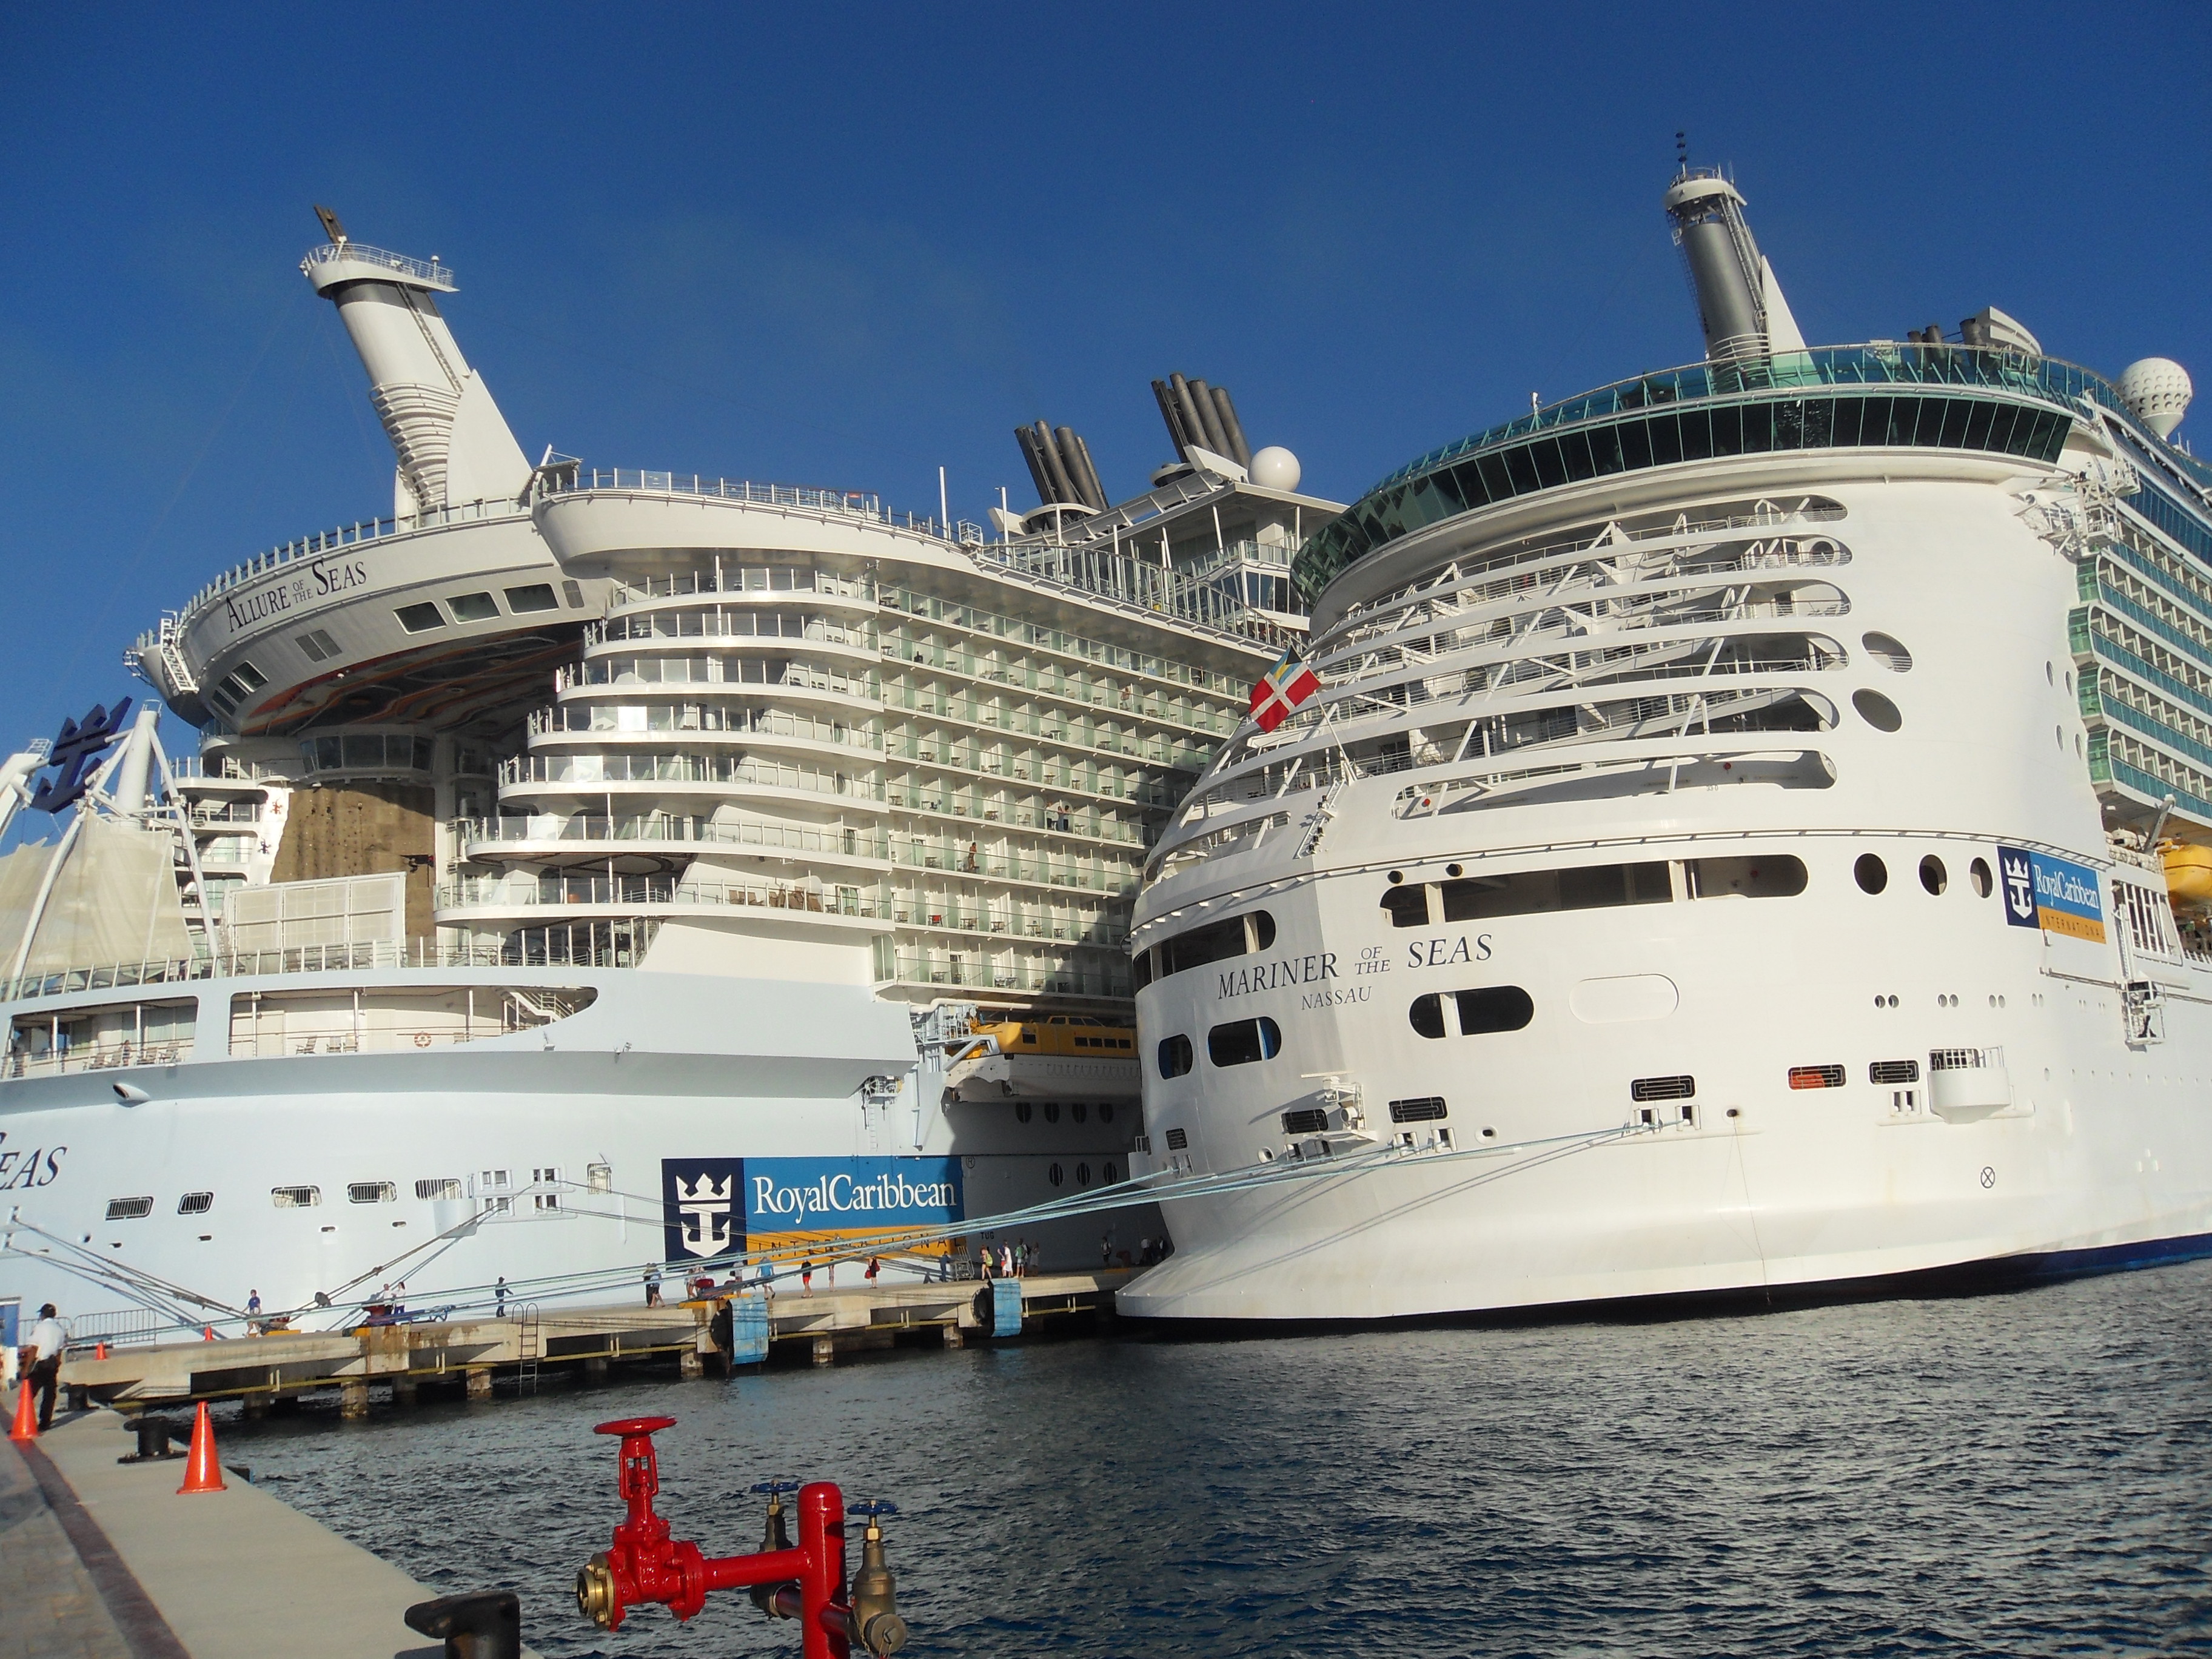 Arrival of cruise ships, Cozumel, Mexico